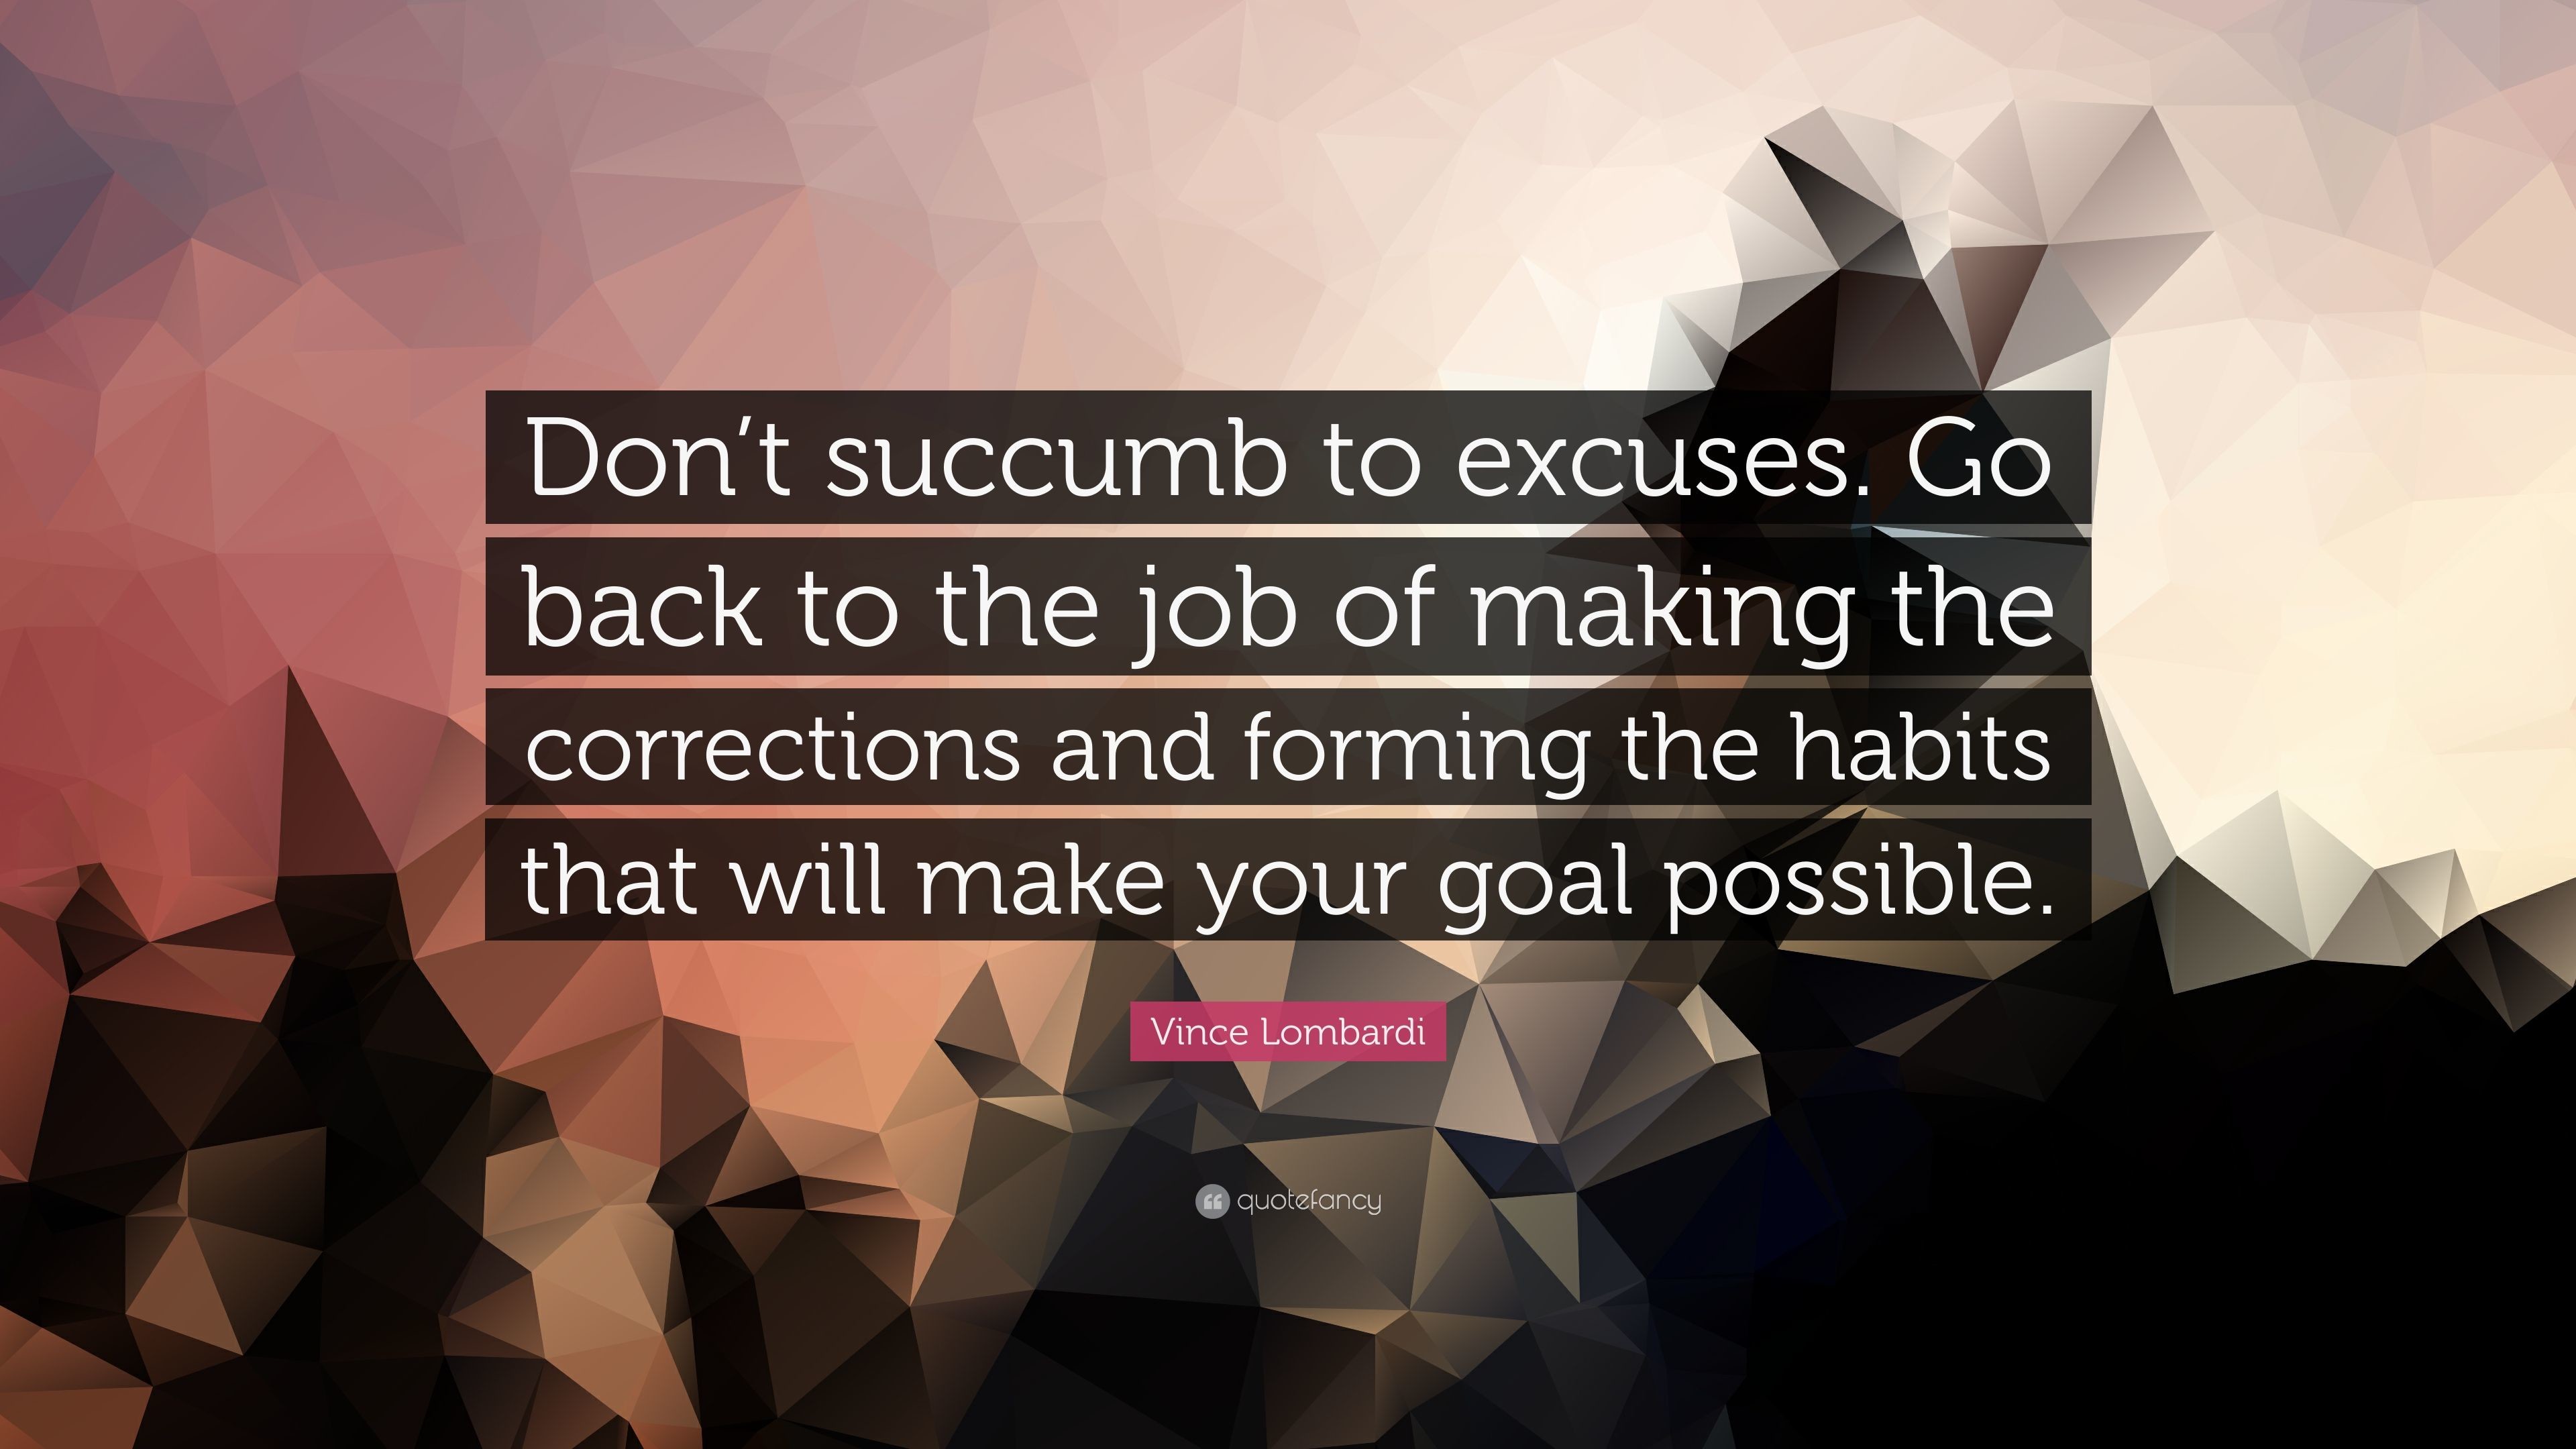 3840x2160 Vince Lombardi Quote: “Don't succumb to excuses. Go back to the